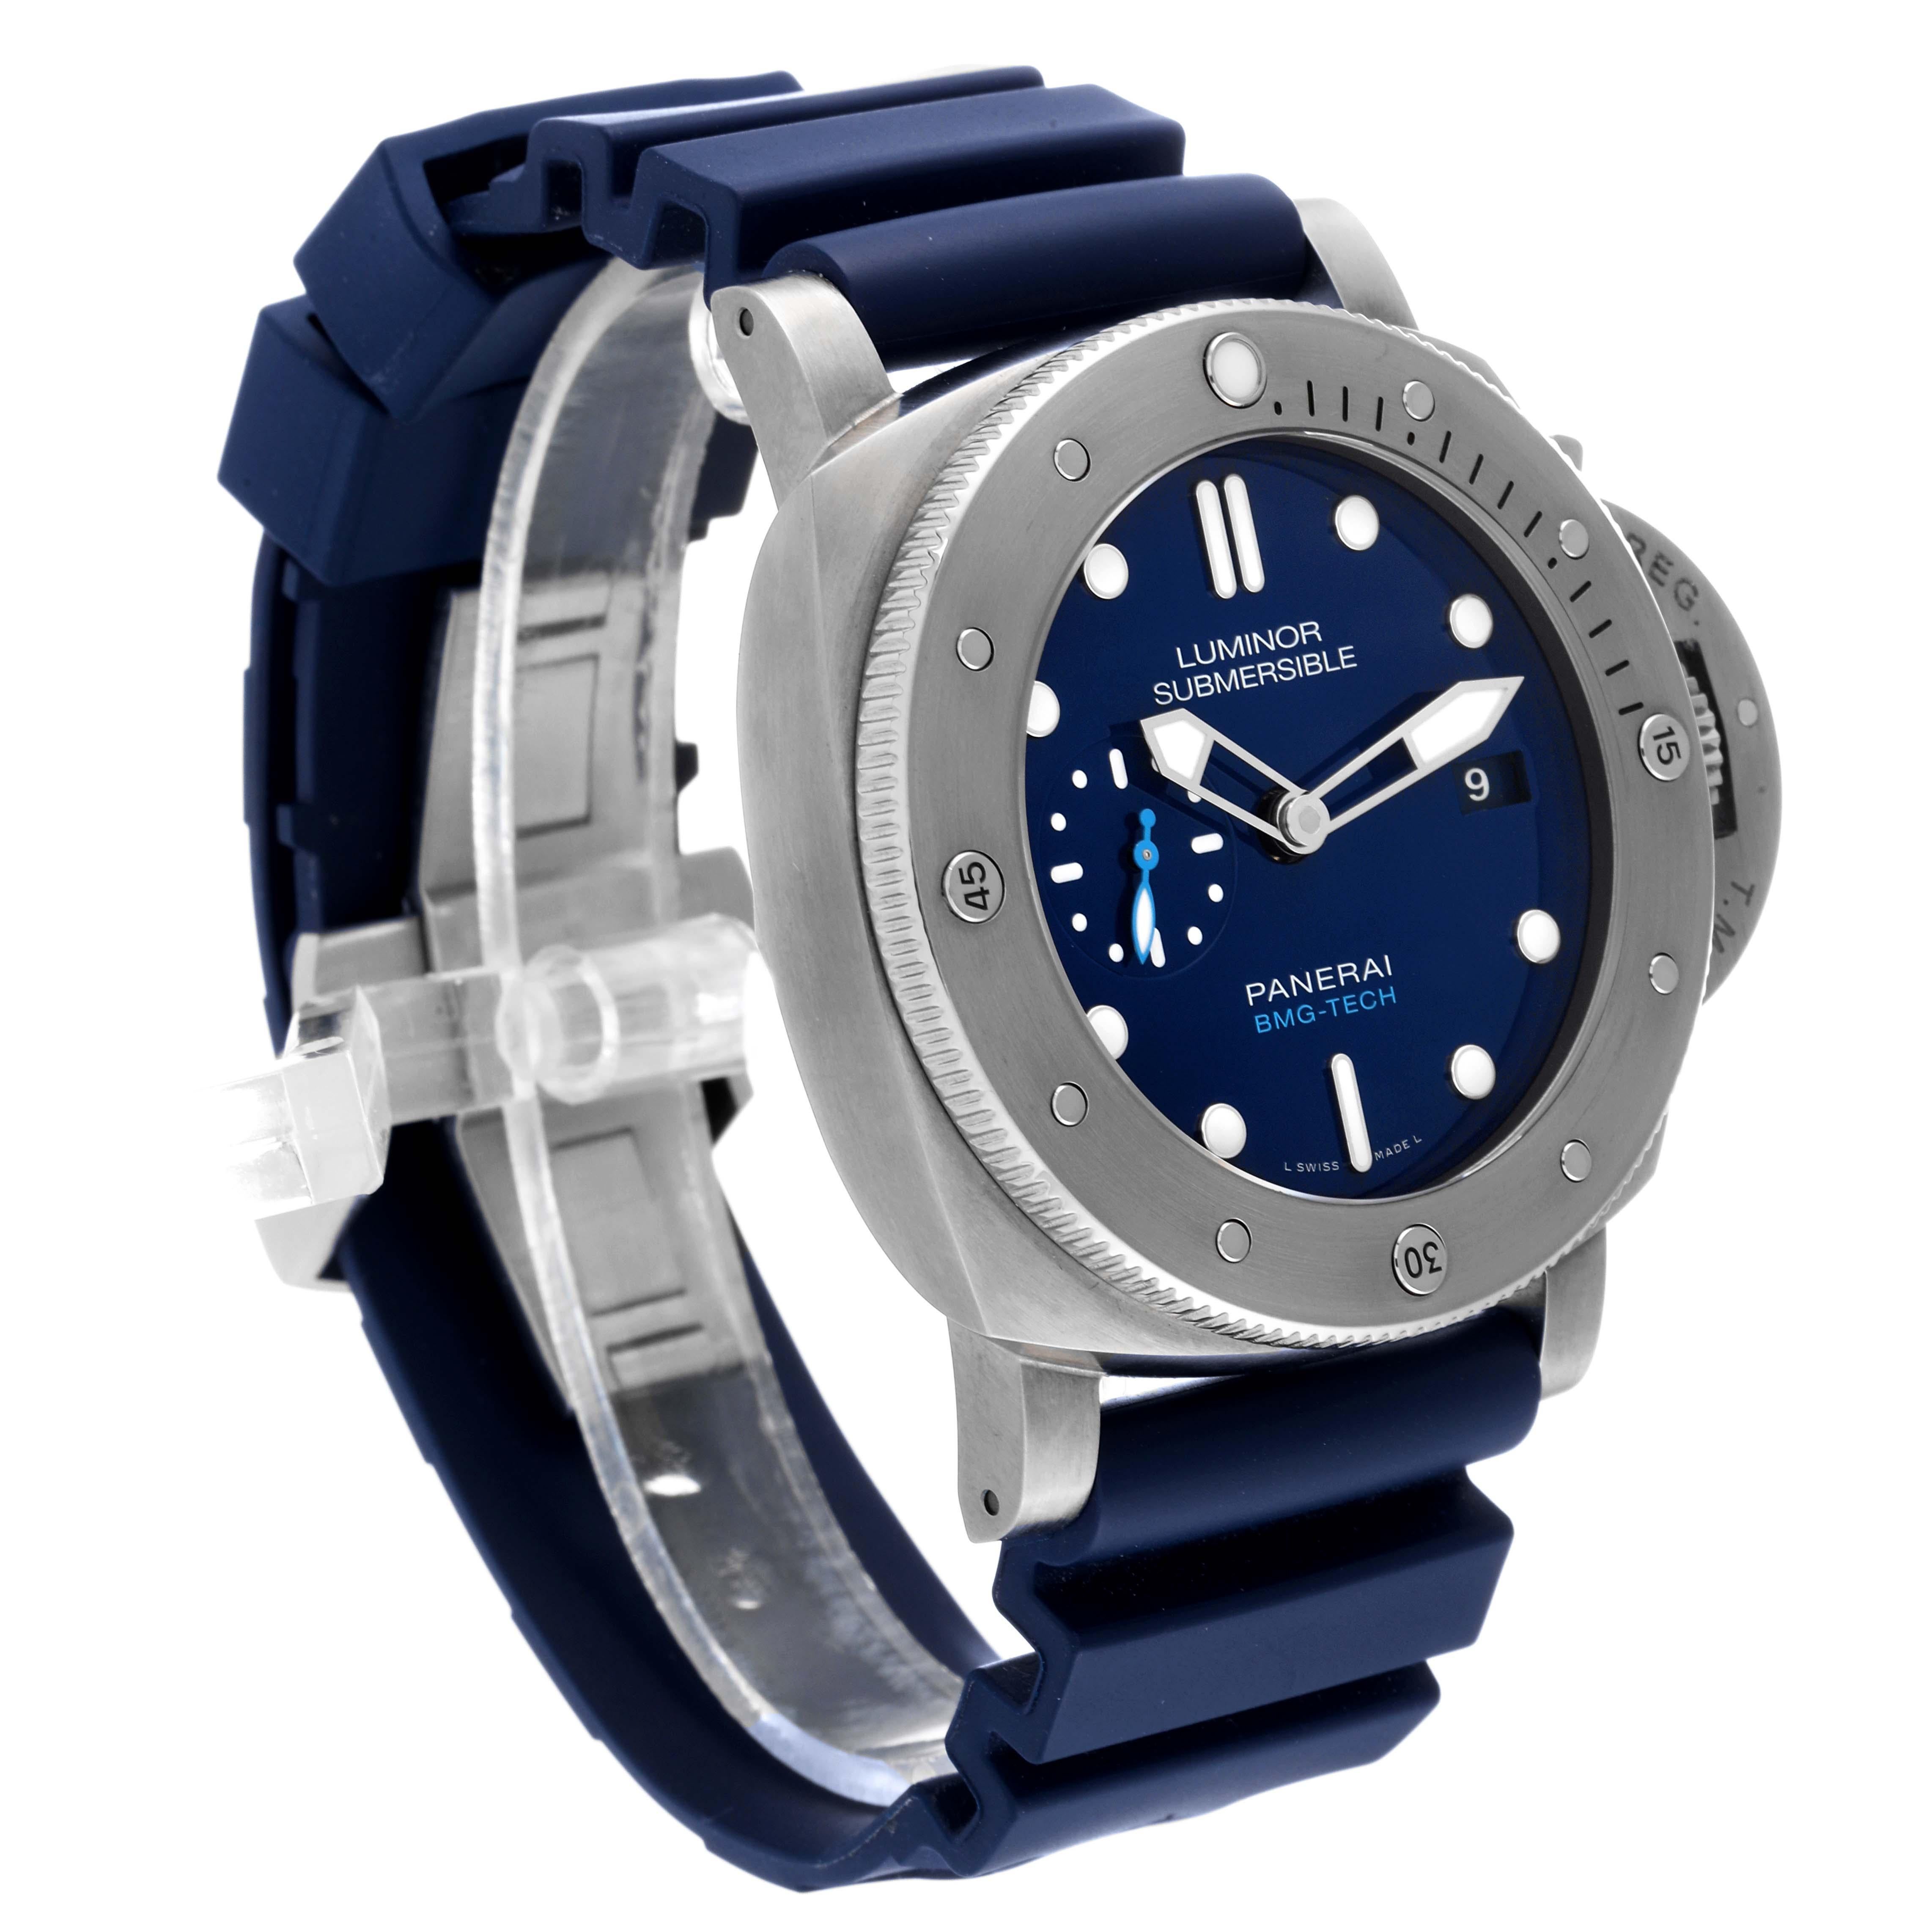 Panerai Submersible BMG-TECH Blue Dial Mens Watch PAM00692 Box Papers. Automatic self-winding movement. Incabloc? anti-shock device. Power reserve 3 days. BMG-Tech case 47.0 mm in diameter. Panerai patented crown protector. Titanium caseback.